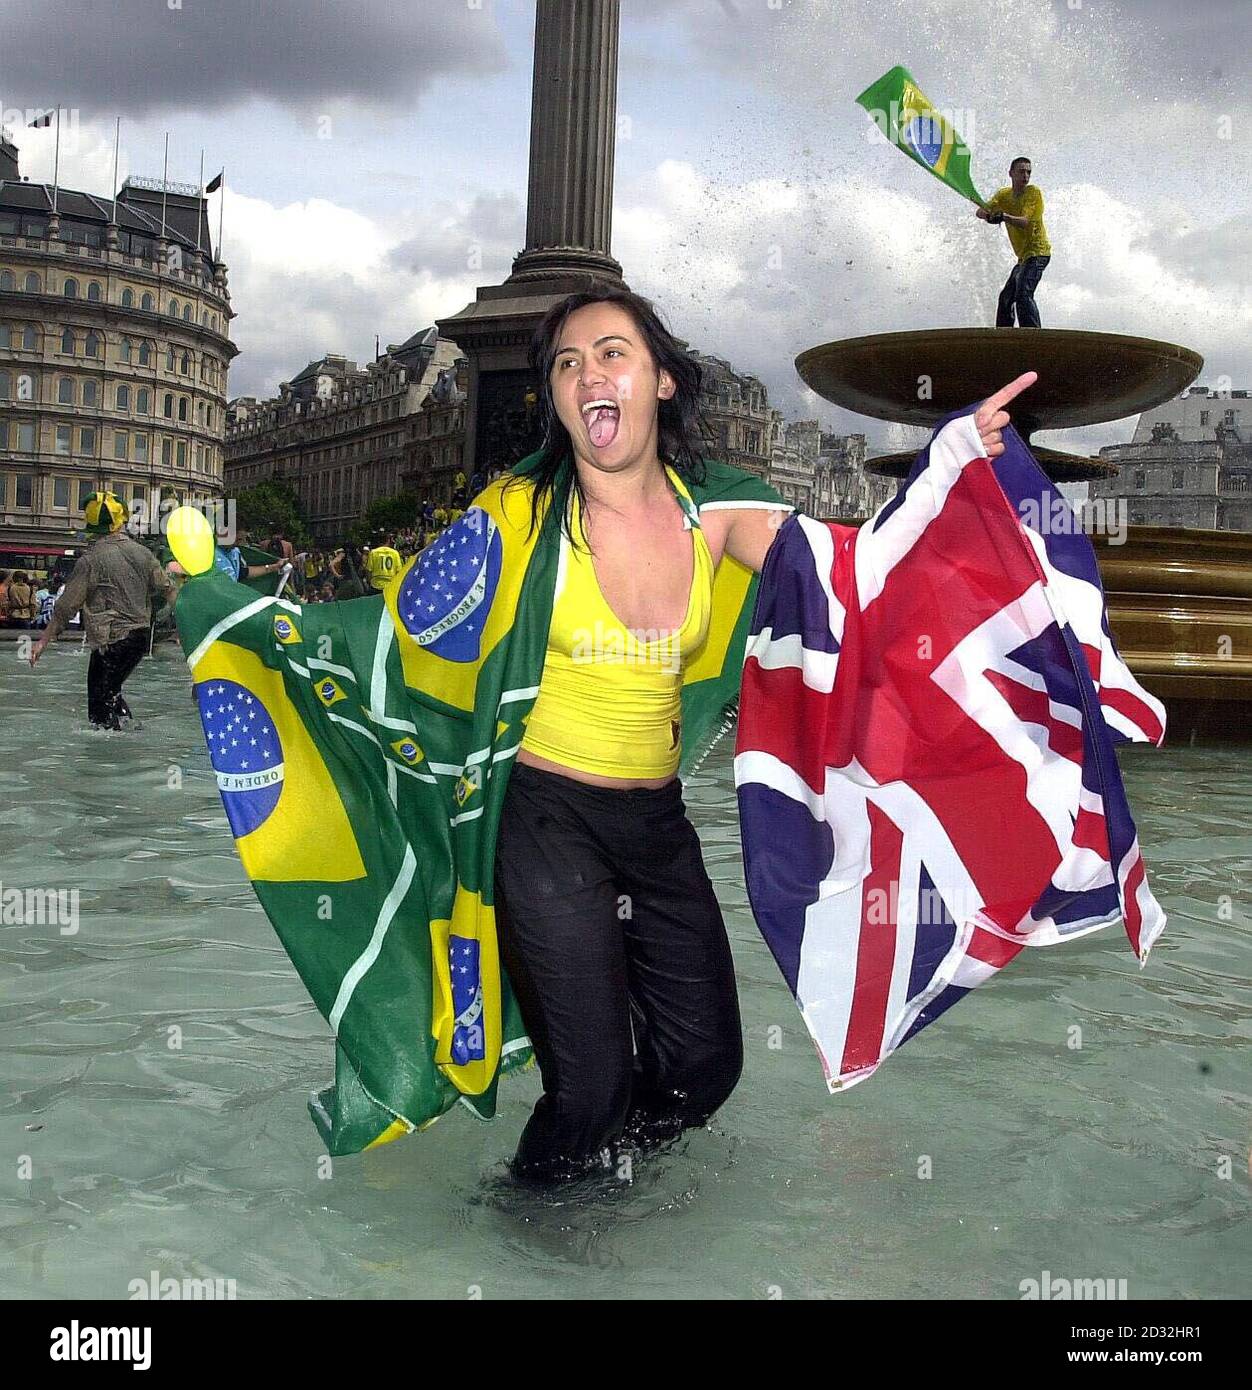 A young Brazilian fan celebrates in a fountain in Trafalgar Square, London. Brazil defeated Germany 2-0 in Yokohama, Japan to win the World Cup for the fifth time, Ronaldo scoring twice in the second half to give his team victory. Stock Photo